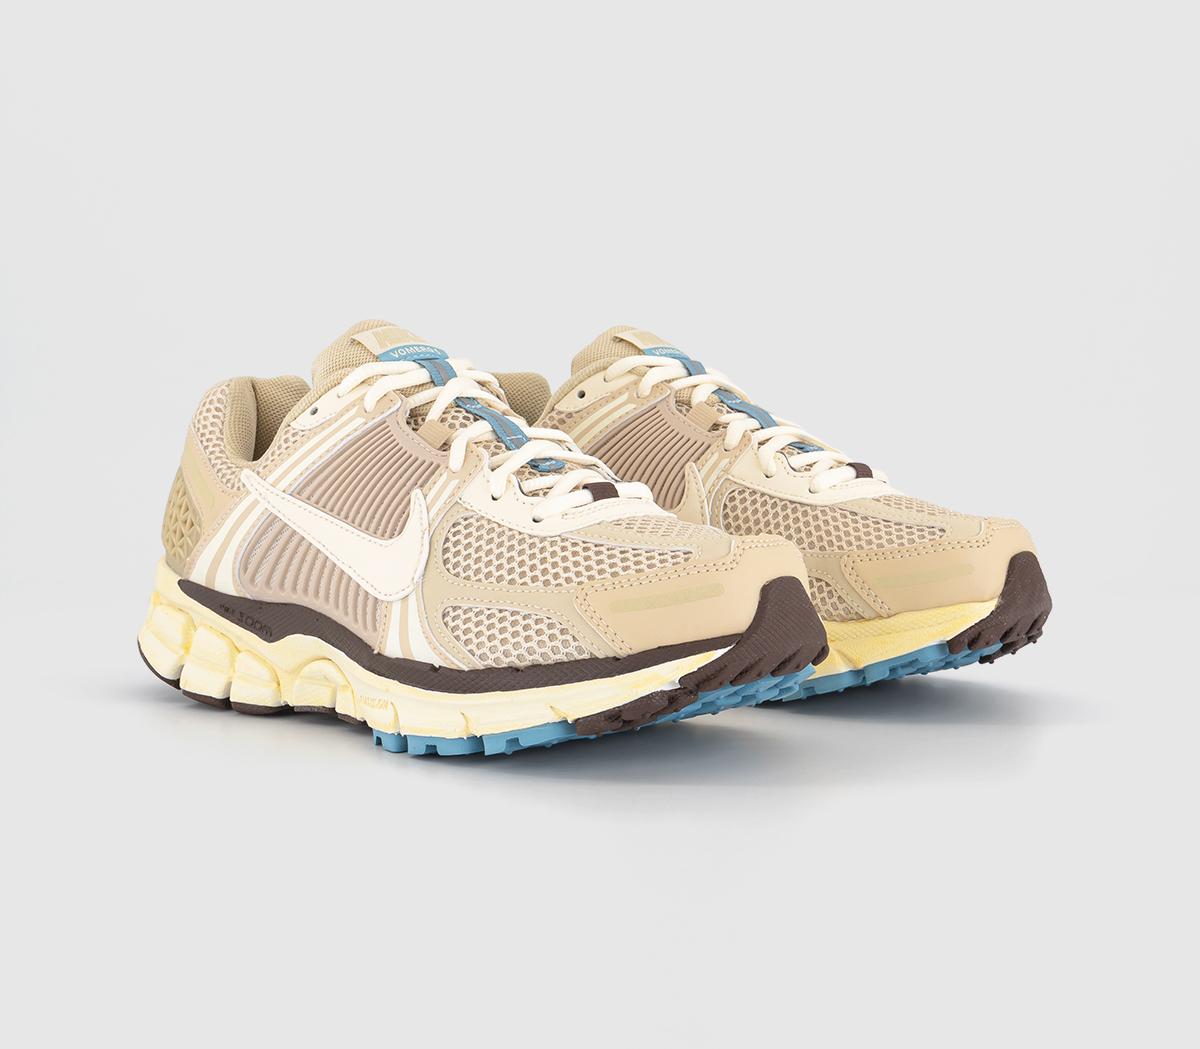 Nike Womens Zoom Vomero 5 Trainers Oatmeal Pale Ivory Sail Light Chocolate Worn Blue Natural, 9.5